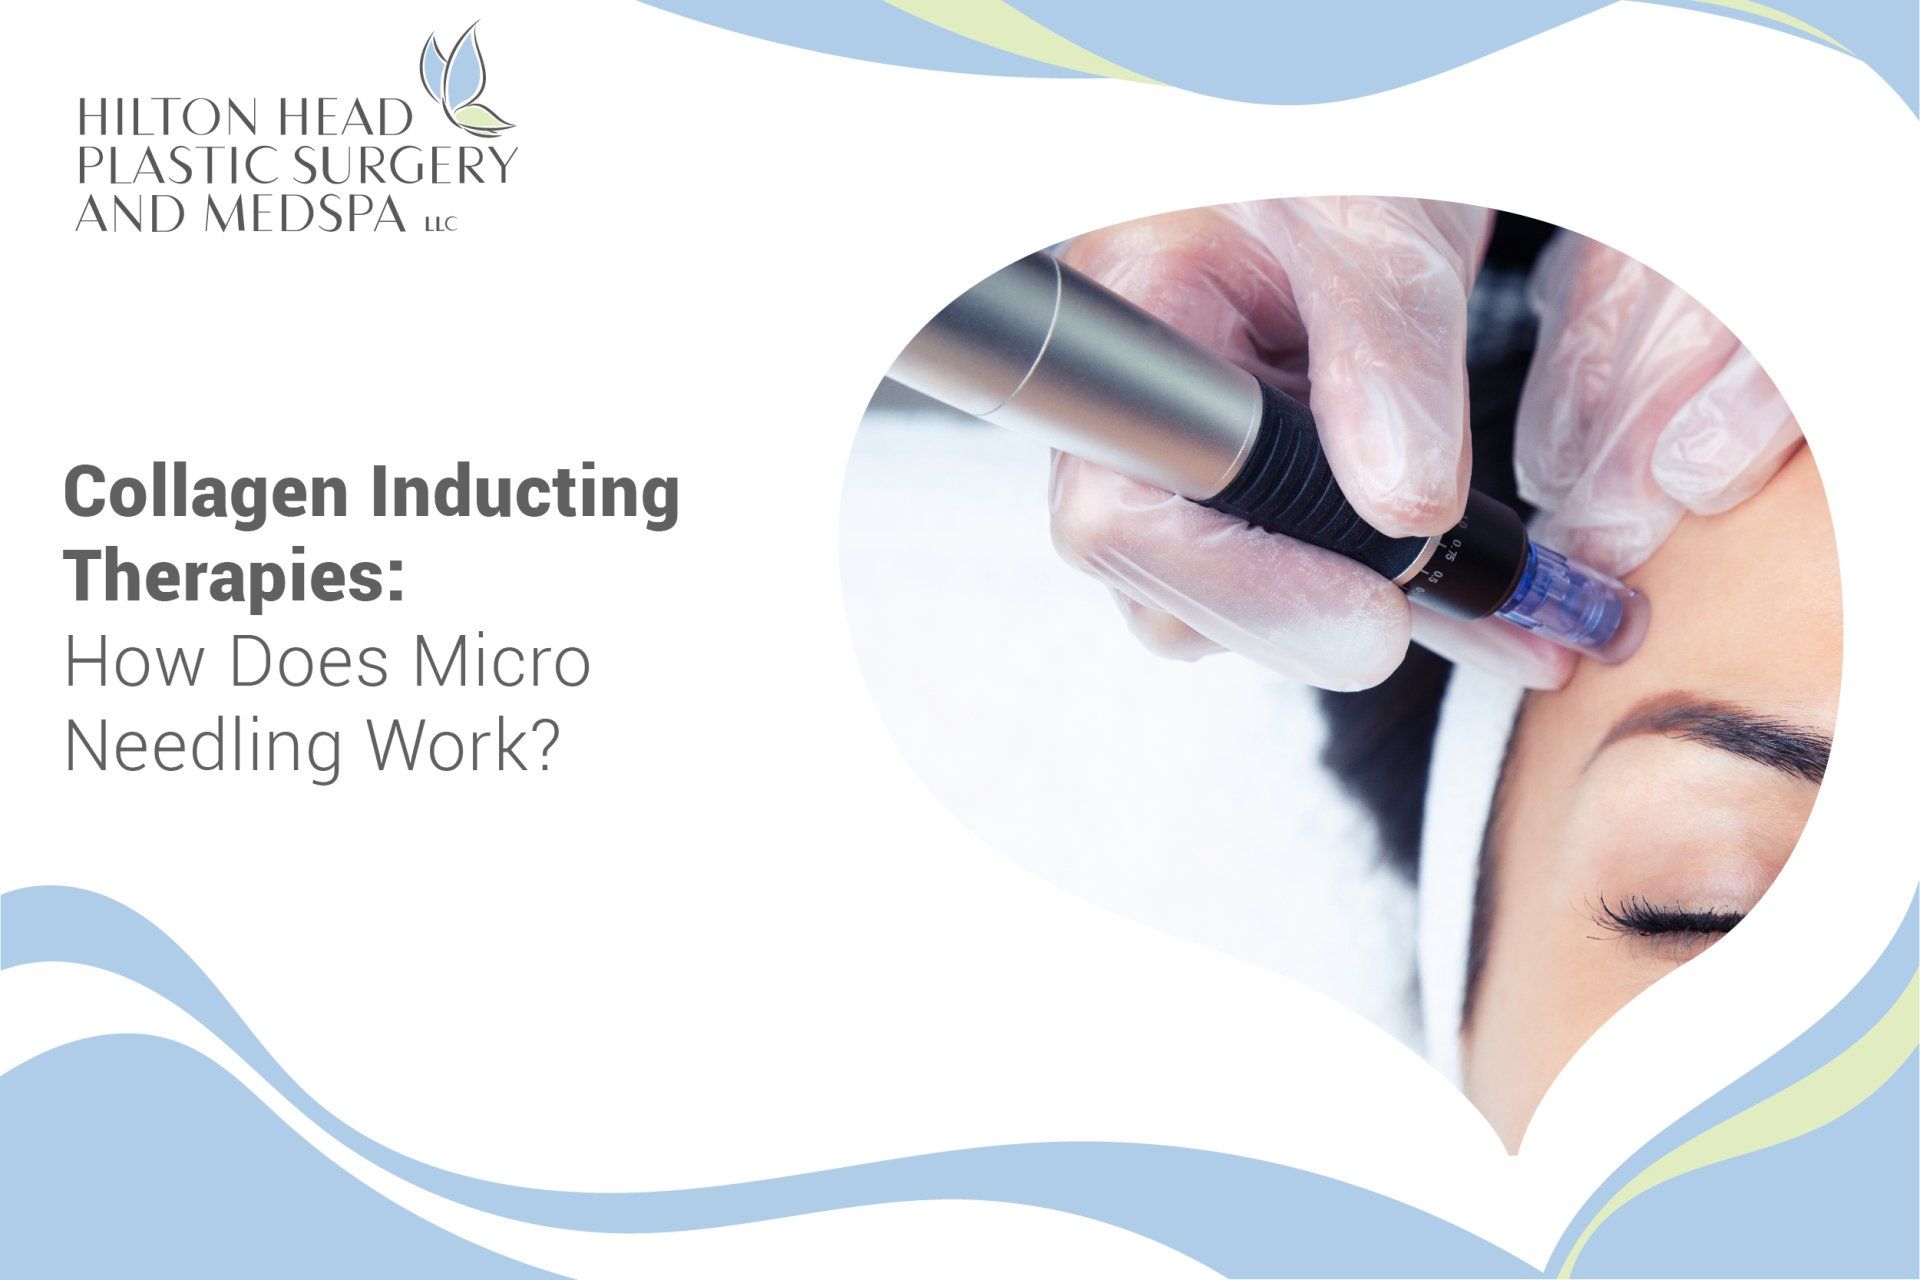 Collagen Inducting Therapies: How Does Micro Needling Work?